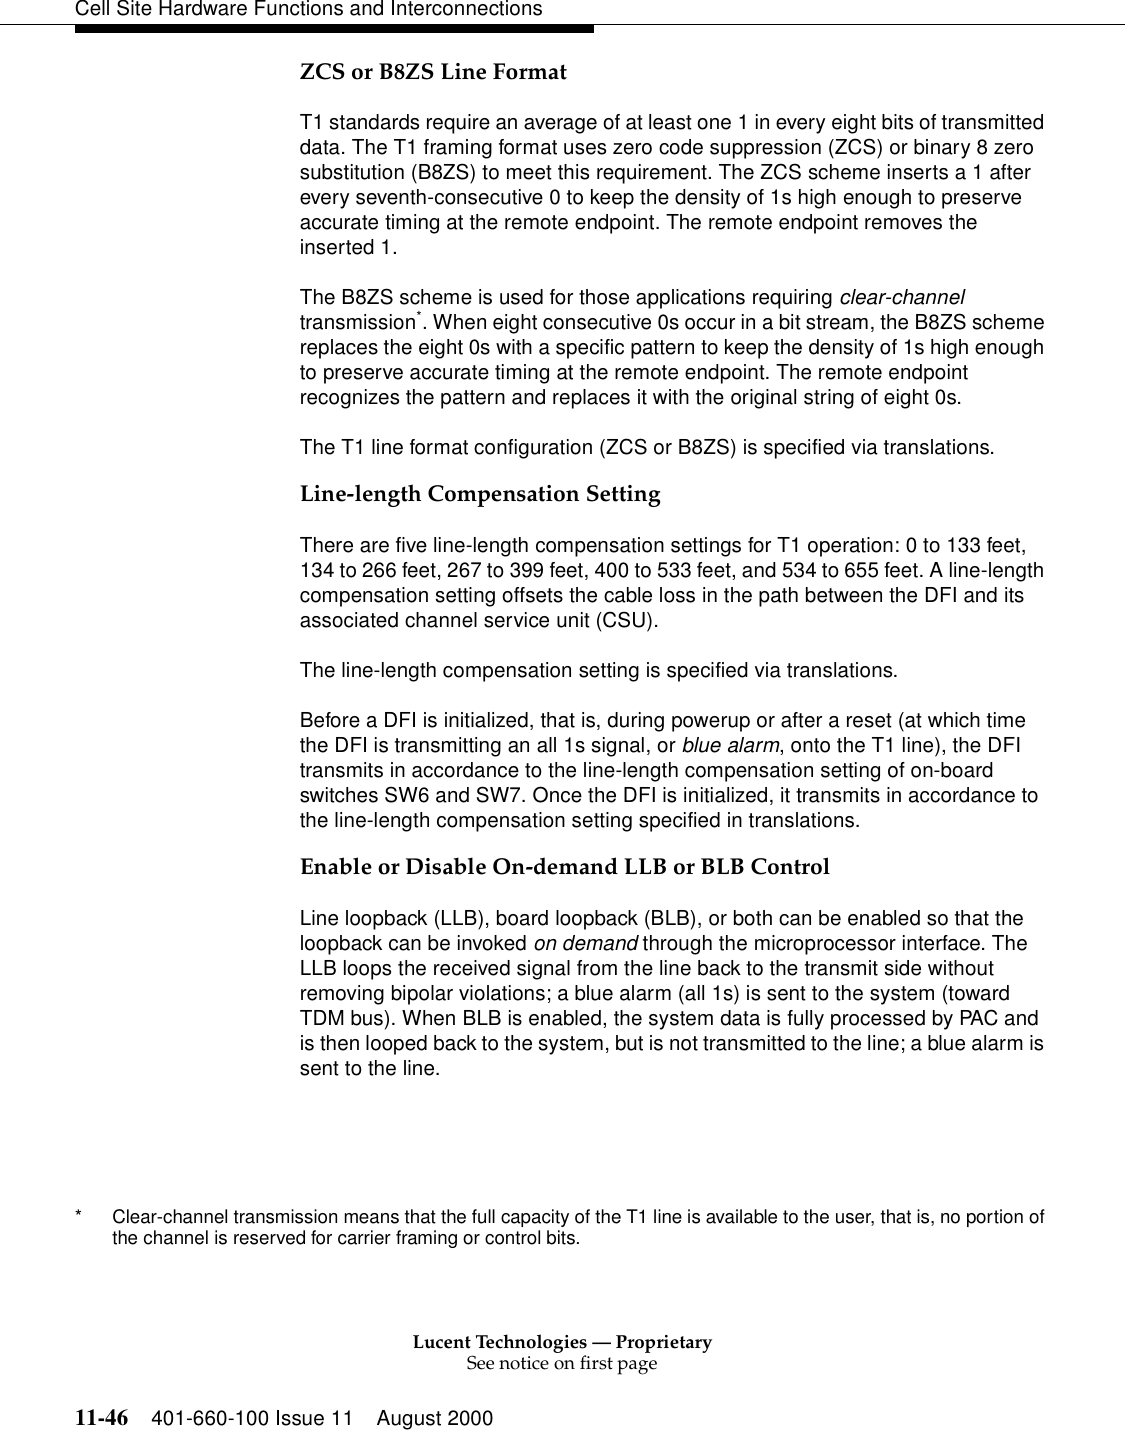 Lucent Technologies — ProprietarySee notice on first page11-46 401-660-100 Issue 11 August 2000Cell Site Hardware Functions and InterconnectionsZCS or B8ZS Line FormatT1 standards require an average of at least one 1 in every eight bits of transmitted data. The T1 framing format uses zero code suppression (ZCS) or binary 8 zero substitution (B8ZS) to meet this requirement. The ZCS scheme inserts a 1 after every seventh-consecutive 0 to keep the density of 1s high enough to preserve accurate timing at the remote endpoint. The remote endpoint removes the inserted 1.The B8ZS scheme is used for those applications requiring clear-channel transmission*. When eight consecutive 0s occur in a bit stream, the B8ZS scheme replaces the eight 0s with a specific pattern to keep the density of 1s high enough to preserve accurate timing at the remote endpoint. The remote endpoint recognizes the pattern and replaces it with the original string of eight 0s.The T1 line format configuration (ZCS or B8ZS) is specified via translations.Line-length Compensation SettingThere are five line-length compensation settings for T1 operation: 0 to 133 feet, 134 to 266 feet, 267 to 399 feet, 400 to 533 feet, and 534 to 655 feet. A line-length compensation setting offsets the cable loss in the path between the DFI and its associated channel service unit (CSU).The line-length compensation setting is specified via translations.Before a DFI is initialized, that is, during powerup or after a reset (at which time the DFI is transmitting an all 1s signal, or blue alarm, onto the T1 line), the DFI transmits in accordance to the line-length compensation setting of on-board switches SW6 and SW7. Once the DFI is initialized, it transmits in accordance to the line-length compensation setting specified in translations.Enable or Disable On-demand LLB or BLB ControlLine loopback (LLB), board loopback (BLB), or both can be enabled so that the loopback can be invoked on demand through the microprocessor interface. The LLB loops the received signal from the line back to the transmit side without removing bipolar violations; a blue alarm (all 1s) is sent to the system (toward TDM bus). When BLB is enabled, the system data is fully processed by PAC and is then looped back to the system, but is not transmitted to the line; a blue alarm is sent to the line.* Clear-channel transmission means that the full capacity of the T1 line is available to the user, that is, no portion of the channel is reserved for carrier framing or control bits.